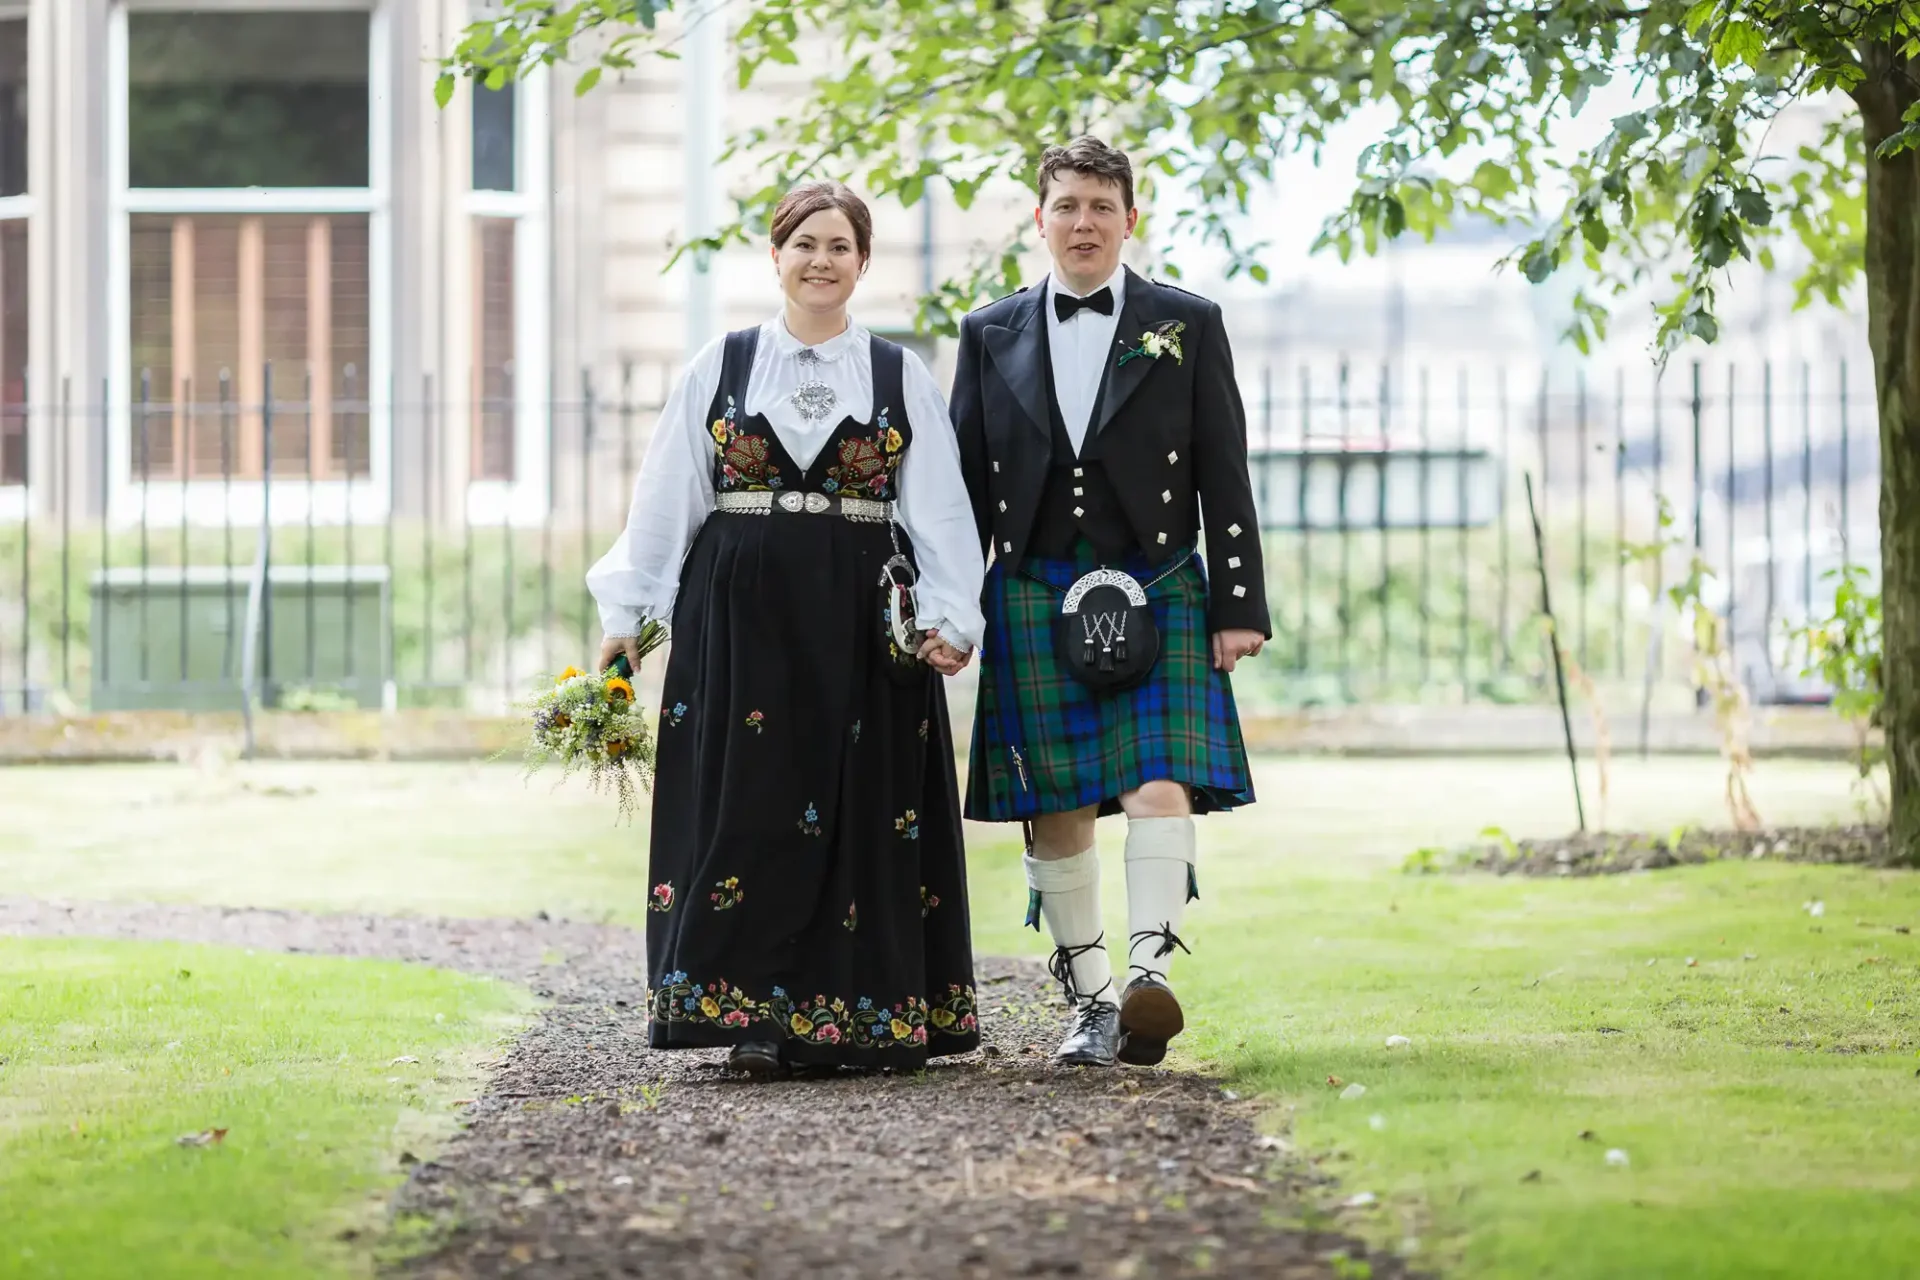 A couple in traditional norwegian and scottish attire walking hand in hand down a tree-lined path at their multicultural wedding.